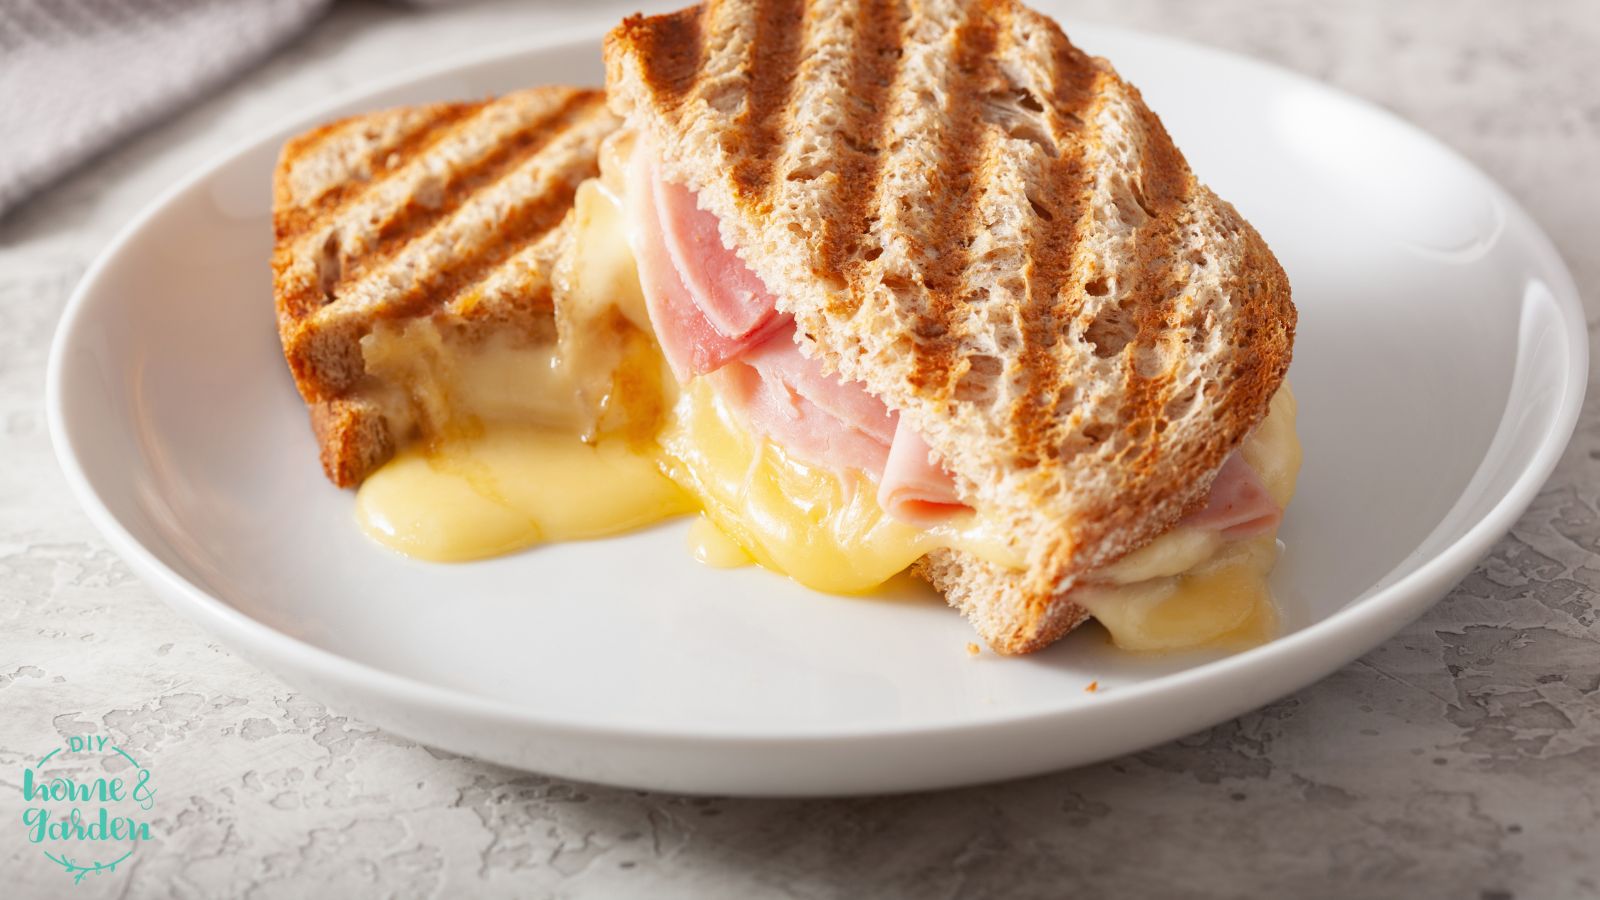 Grilled Cheese Sandwich Upgrades: Tasty Twists on a Comfort Food Classic